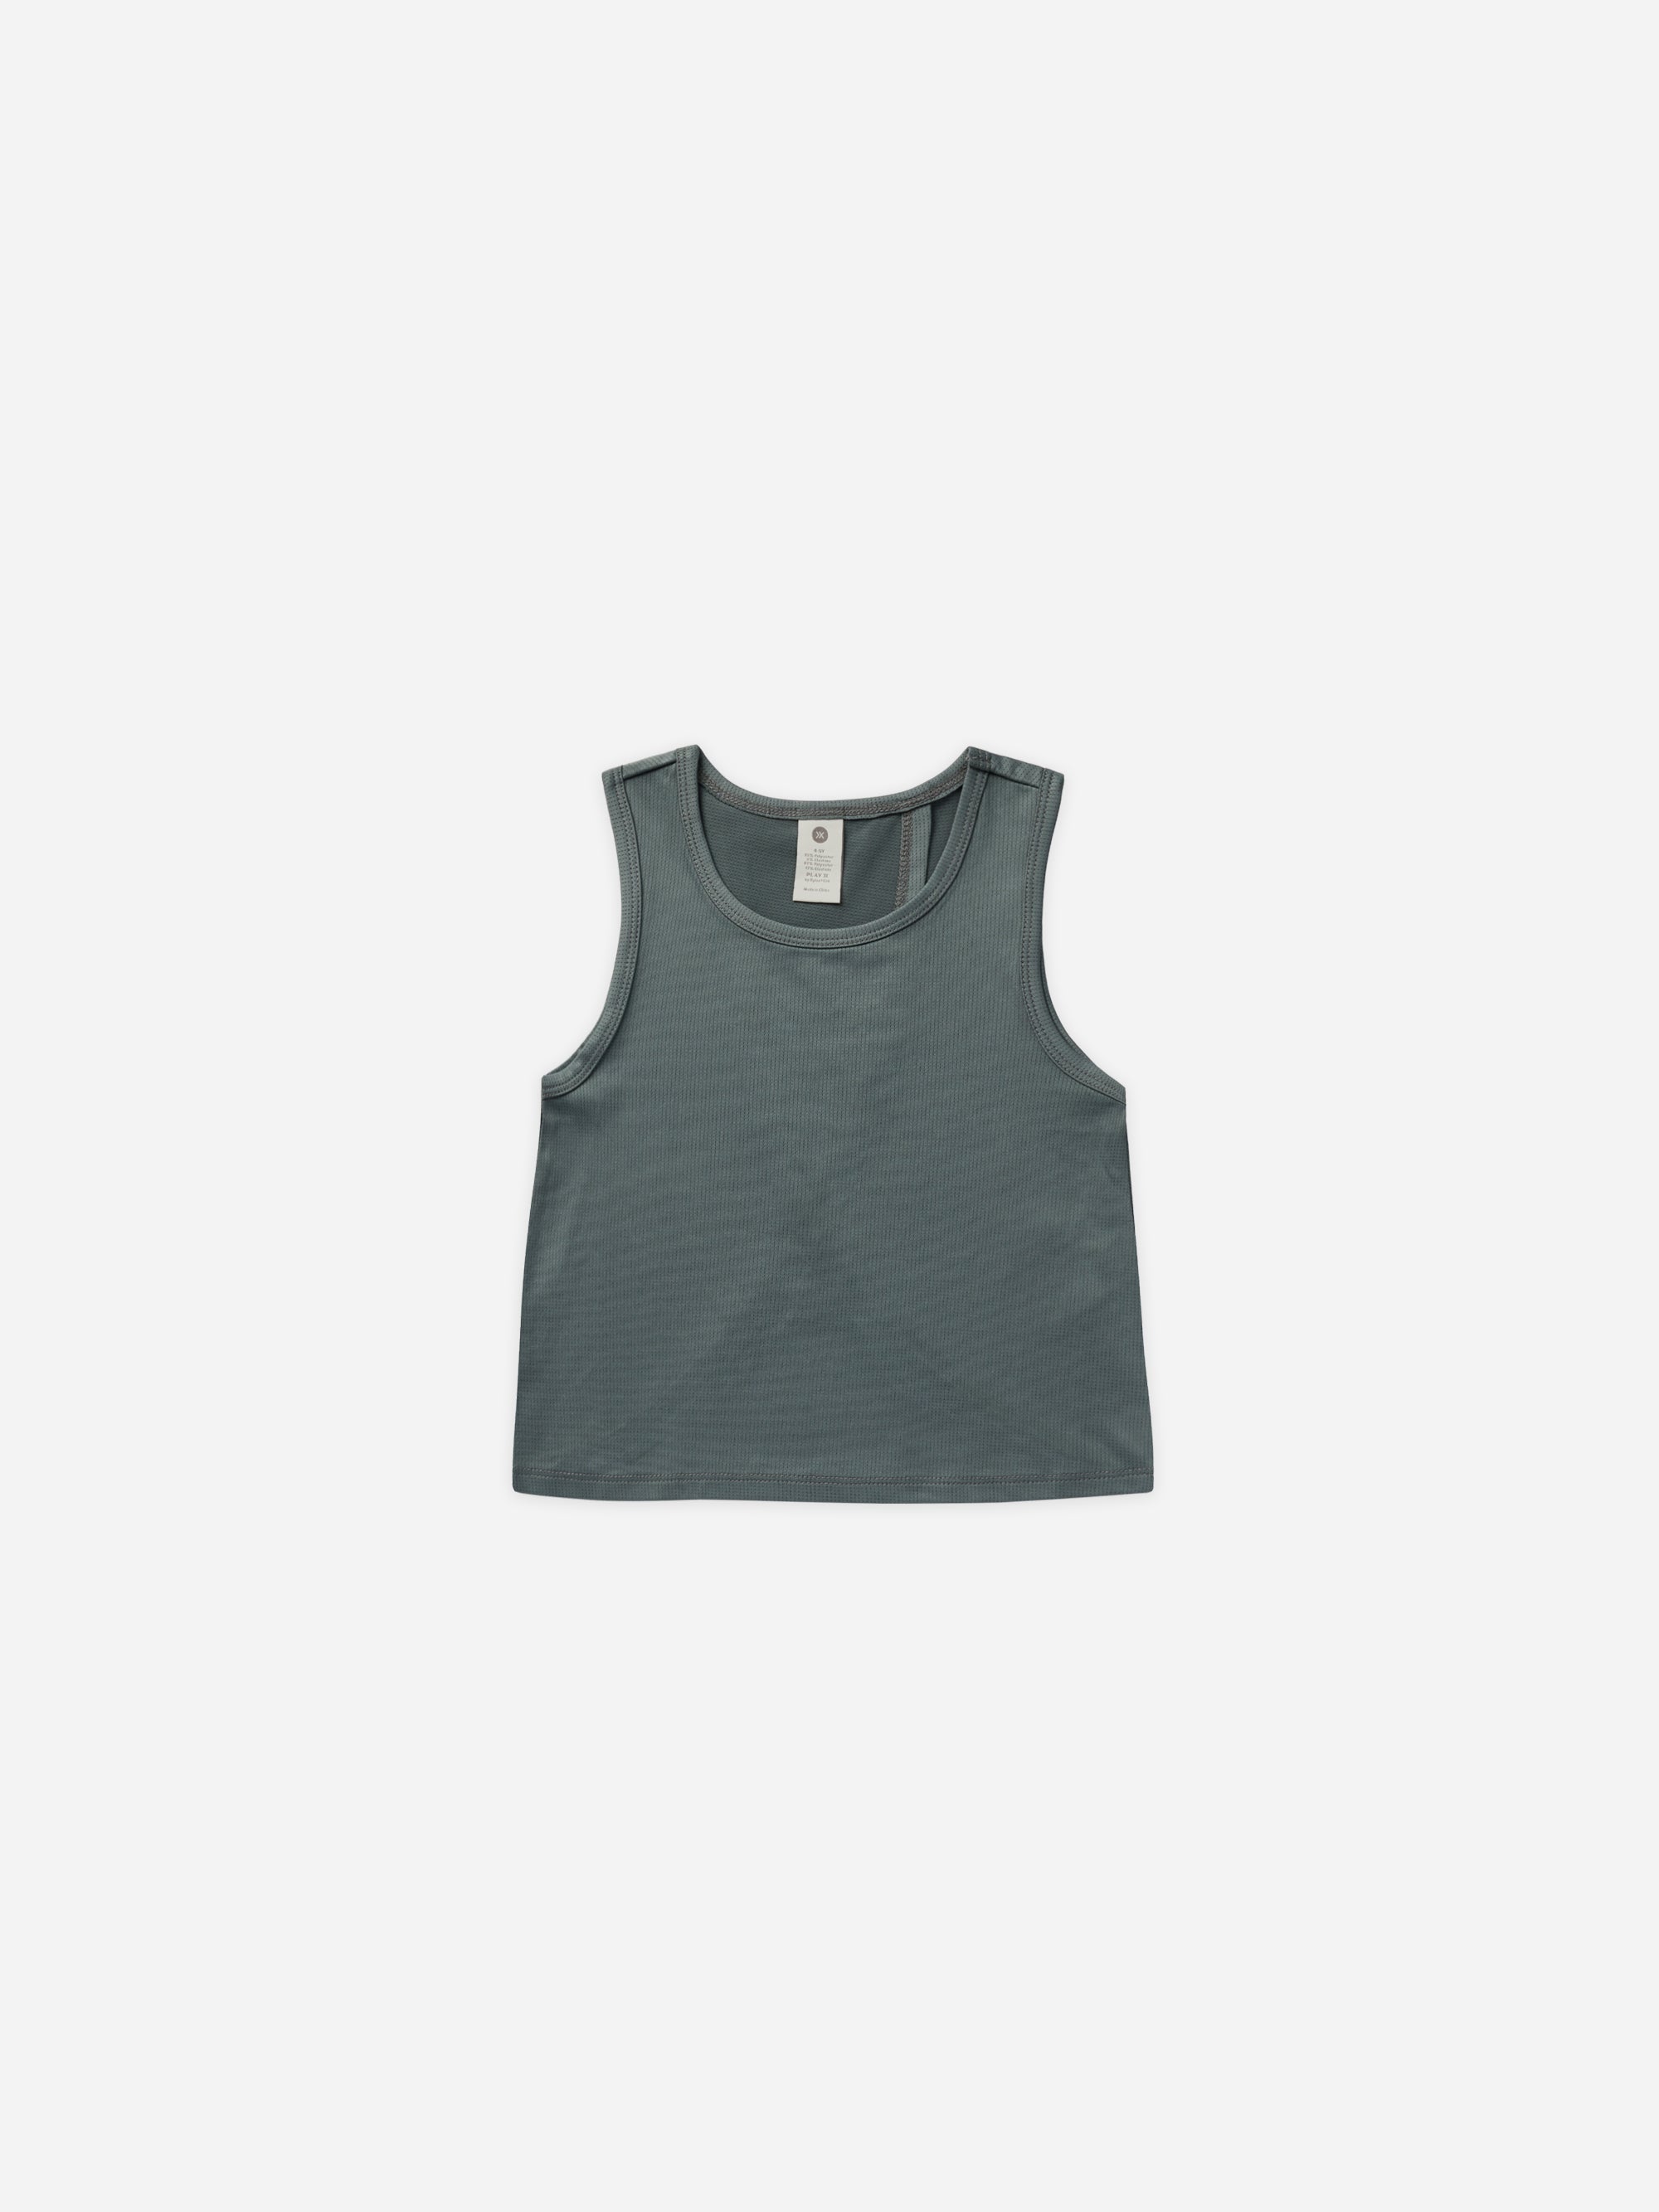 Tulip-Back Tech Tank || Indigo - Rylee + Cru | Kids Clothes | Trendy Baby Clothes | Modern Infant Outfits |